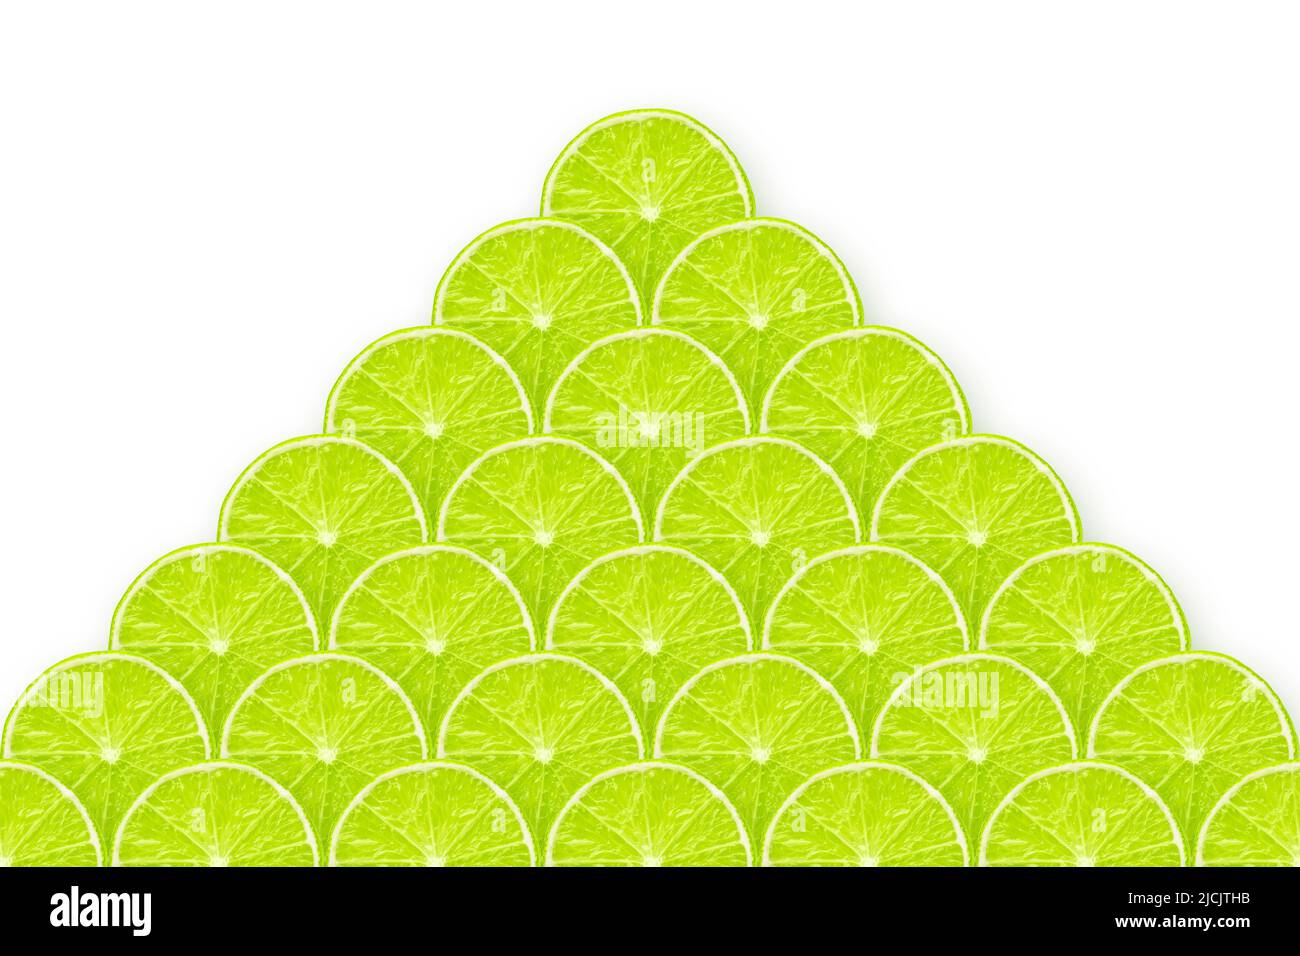 pyramid made from many fresh lime slices on white Stock Photo